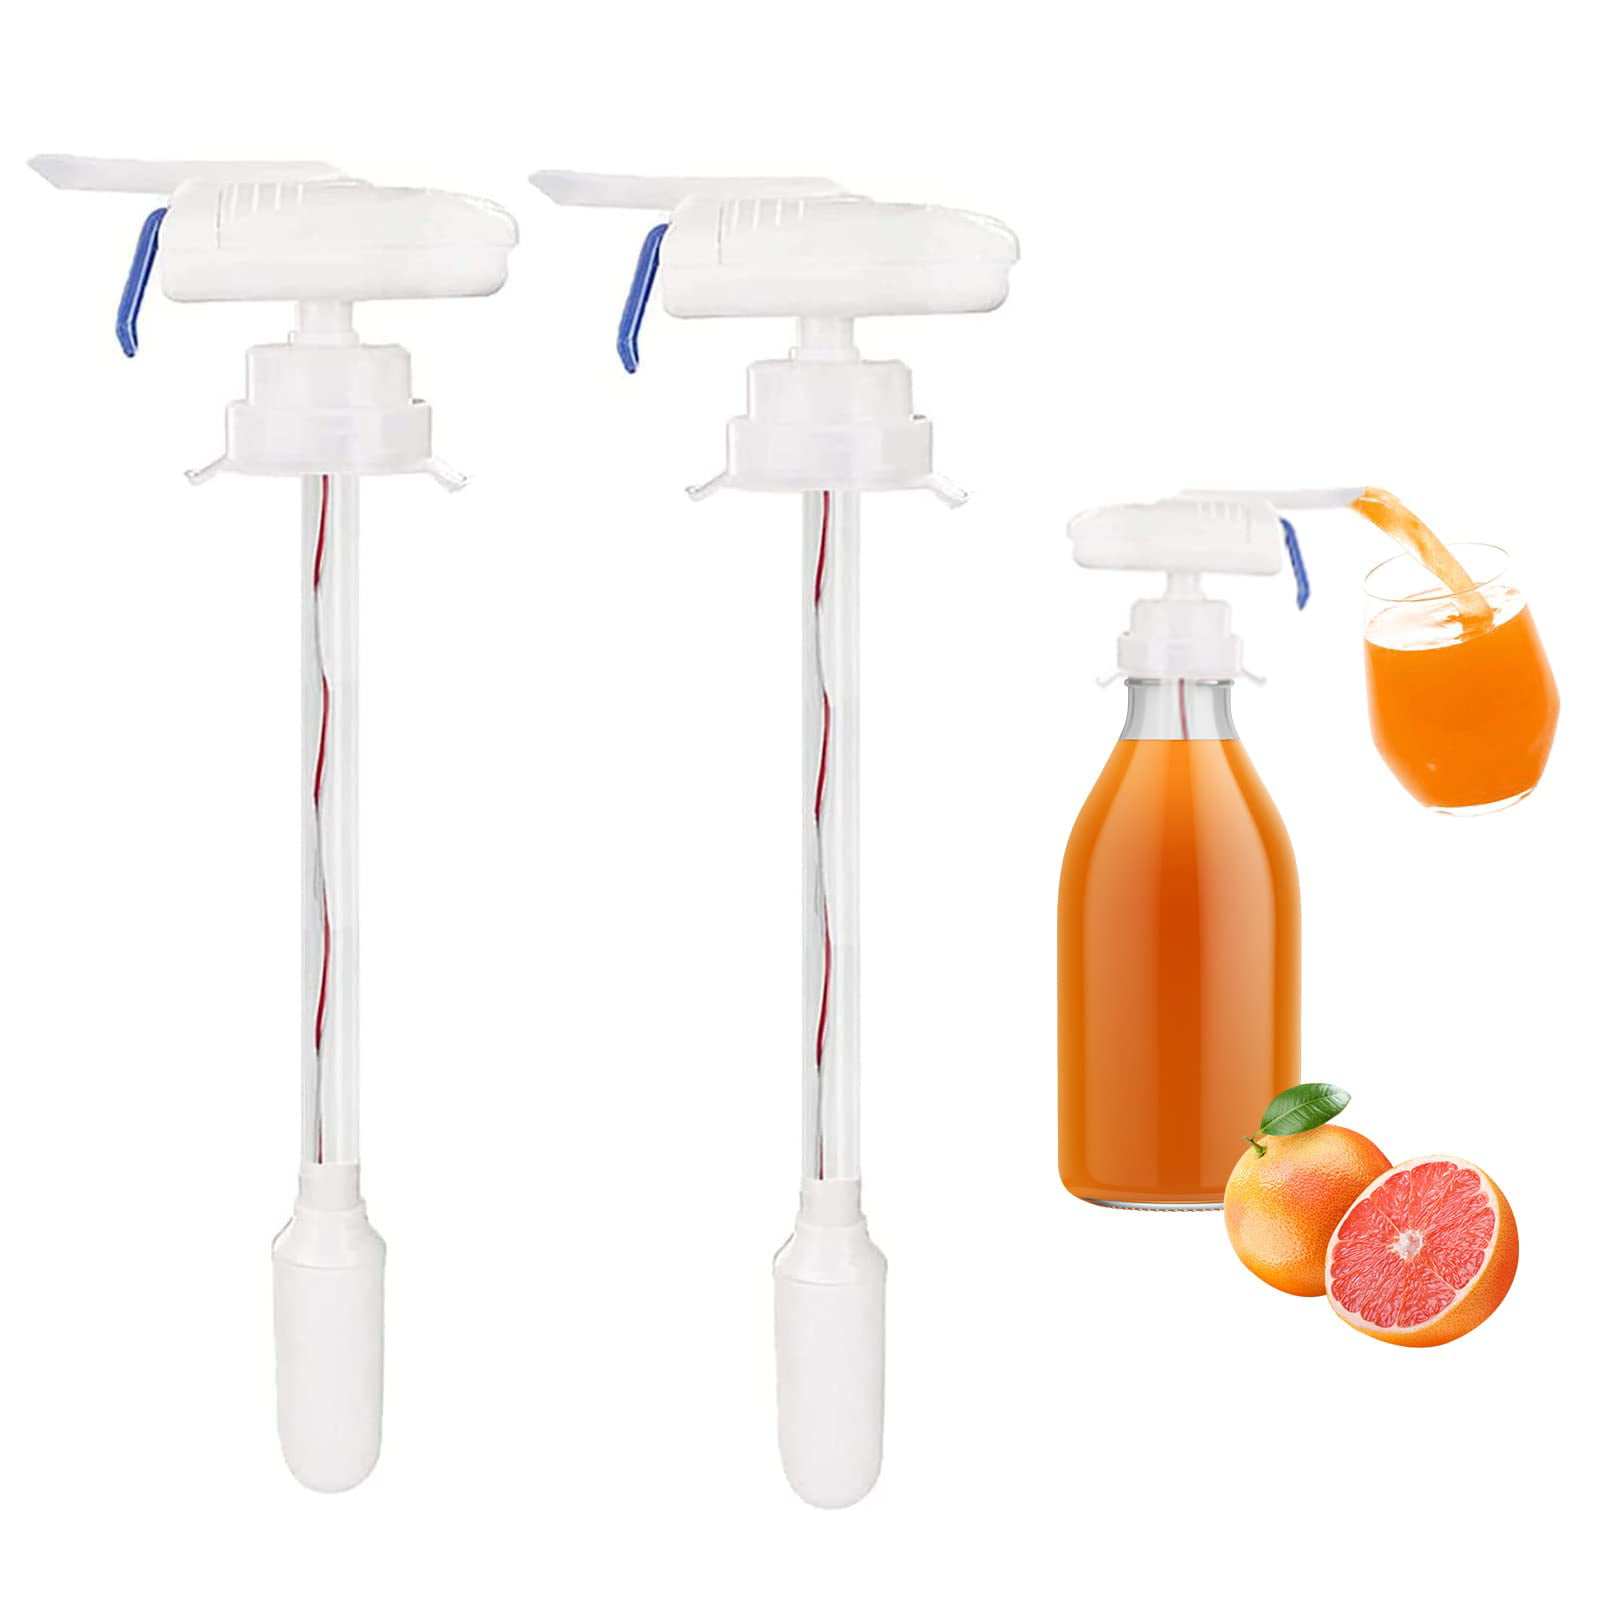 Magic Electric Tap for Milk Juice Beer Spill Proof Magic Beverage Dispenser magic electric tap maiting for Party wedding decoration Outdoor Home Kitchen 2 Pcs Automatic Drink Dispenser 